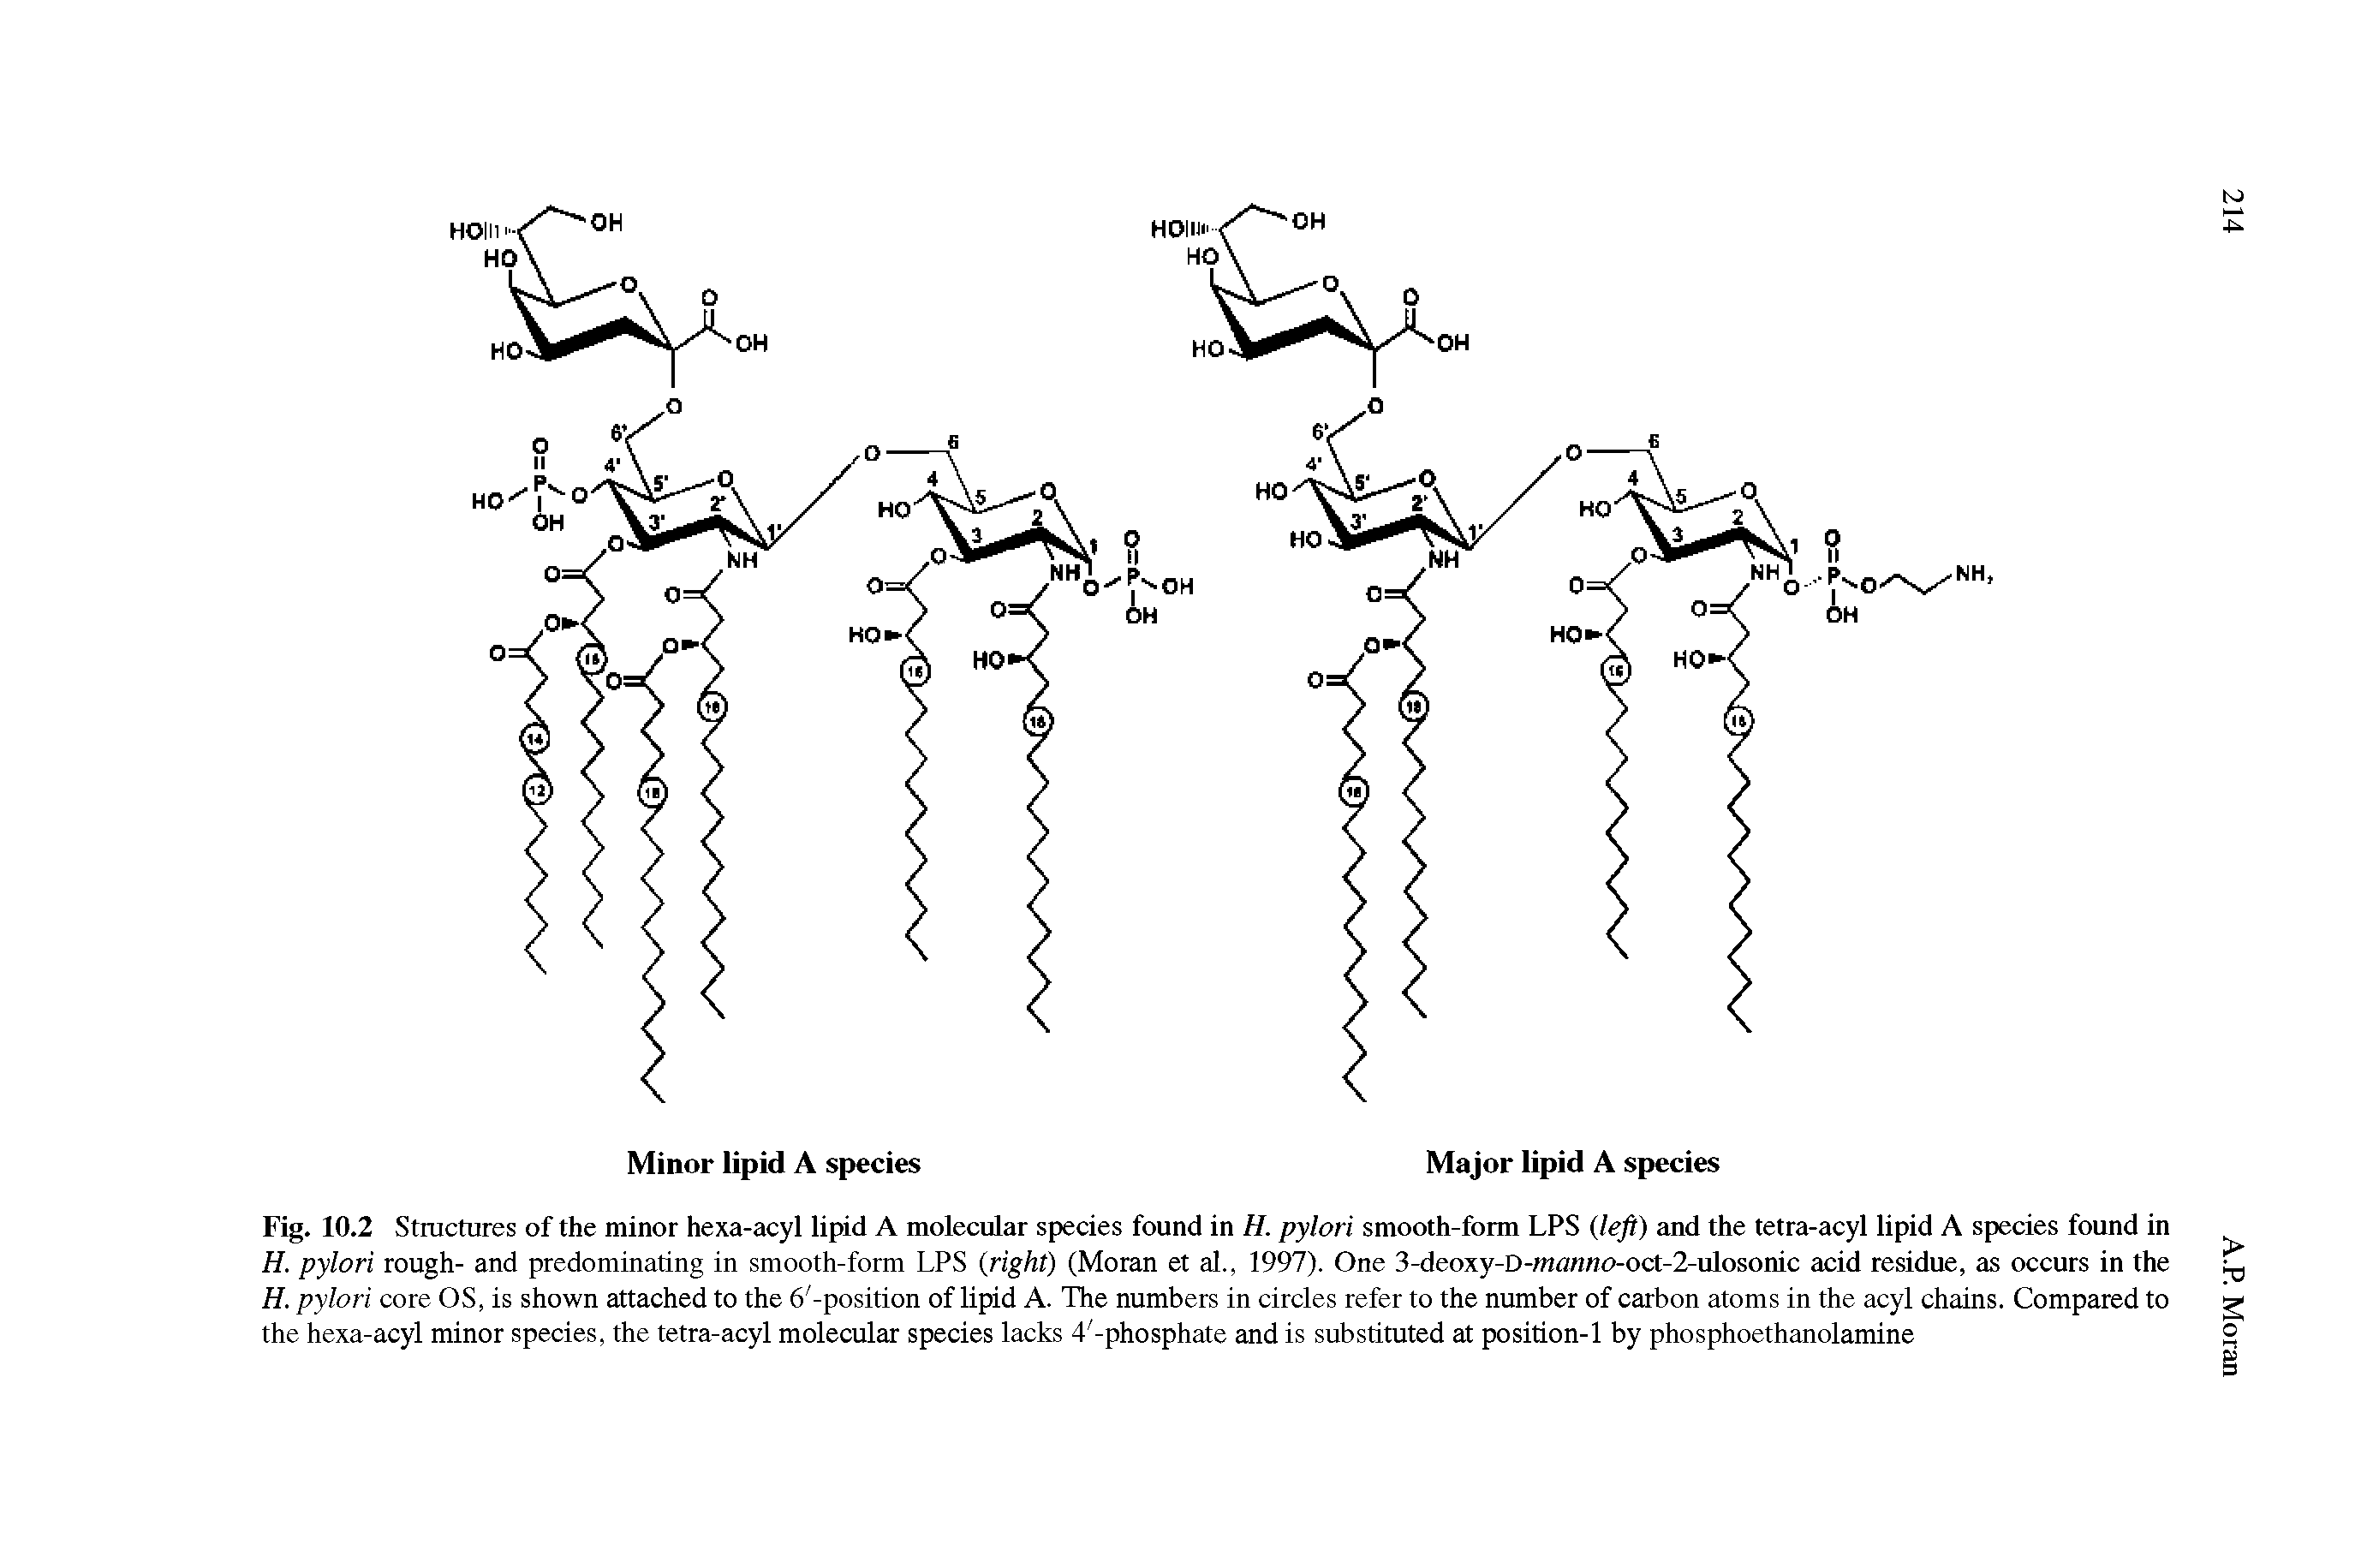 Fig. 10.2 Structures of the minor hexa-acyl lipid A molecular species found in H. pylori smooth-form LPS (left) and the tetra-acyl lipid A species found in H. pylori rough- and predominating in smooth-form LPS (right) (Moran et al., 1997). One 3-deoxy-D-man ooct-2-ulosonic acid residue, as occurs in the H. pylori core OS, is shown attached to the 6 -position of lipid A. The numbers in circles refer to the number of carbon atoms in the acyl chains. Compared to the hexa-acyl minor species, the tetra-acyl molecular species lacks 4 -phosphate and is substituted at position-1 by phosphoethanolamine...